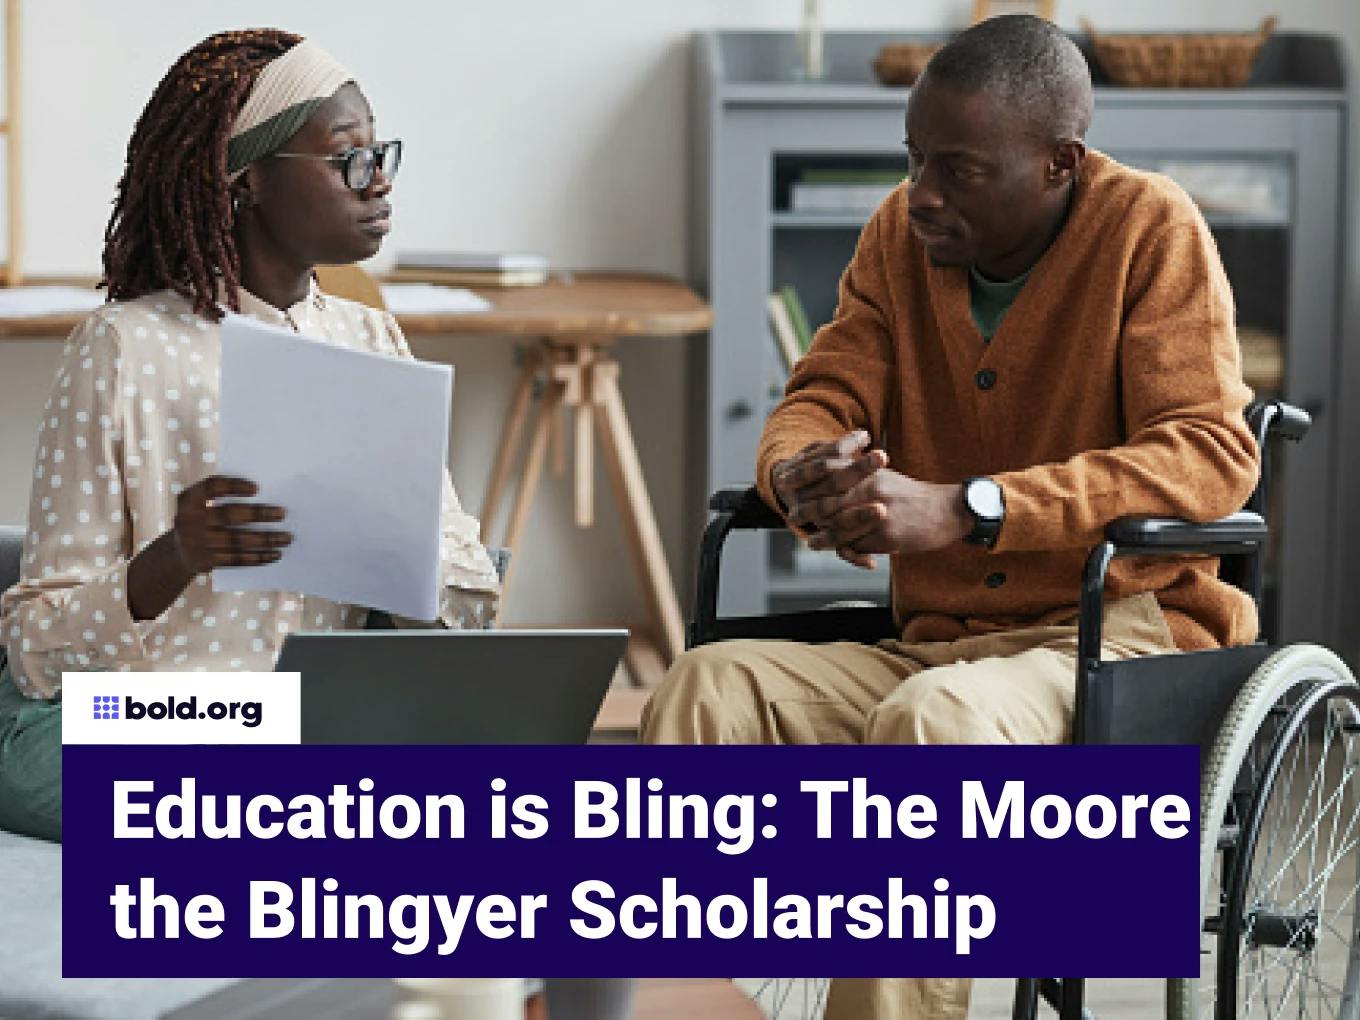 Education is Bling: The Moore the Blingyer Scholarship